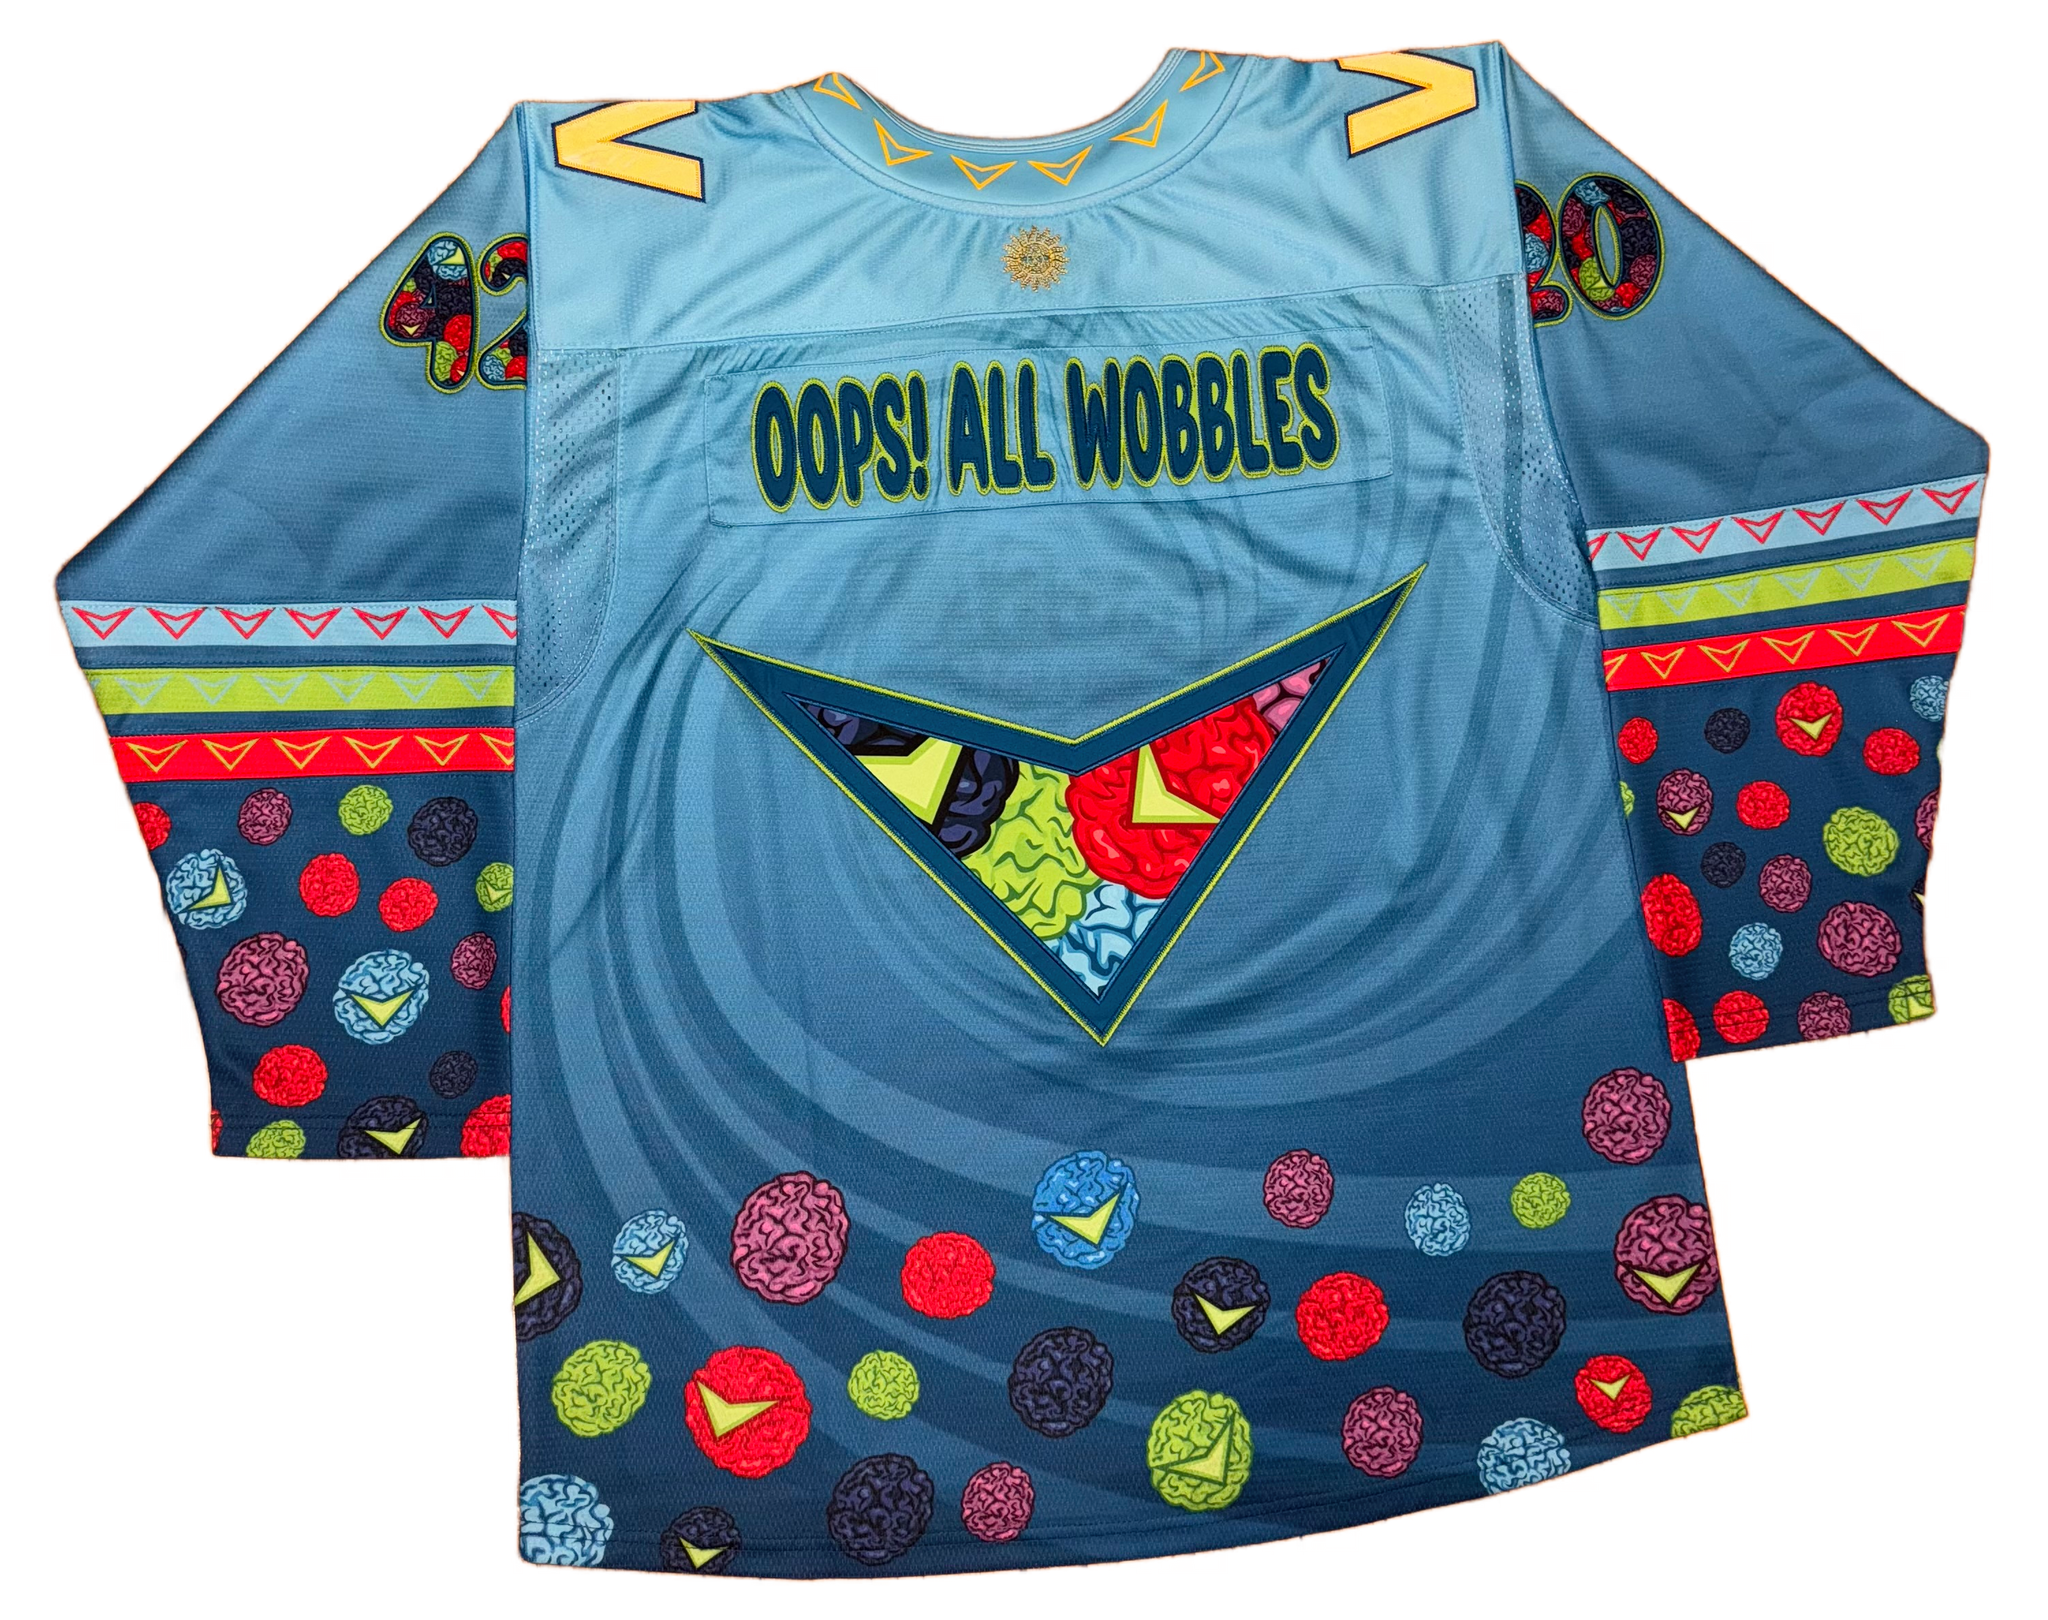 OOPS! ALL WOBBLES HOCKEY JERSEY